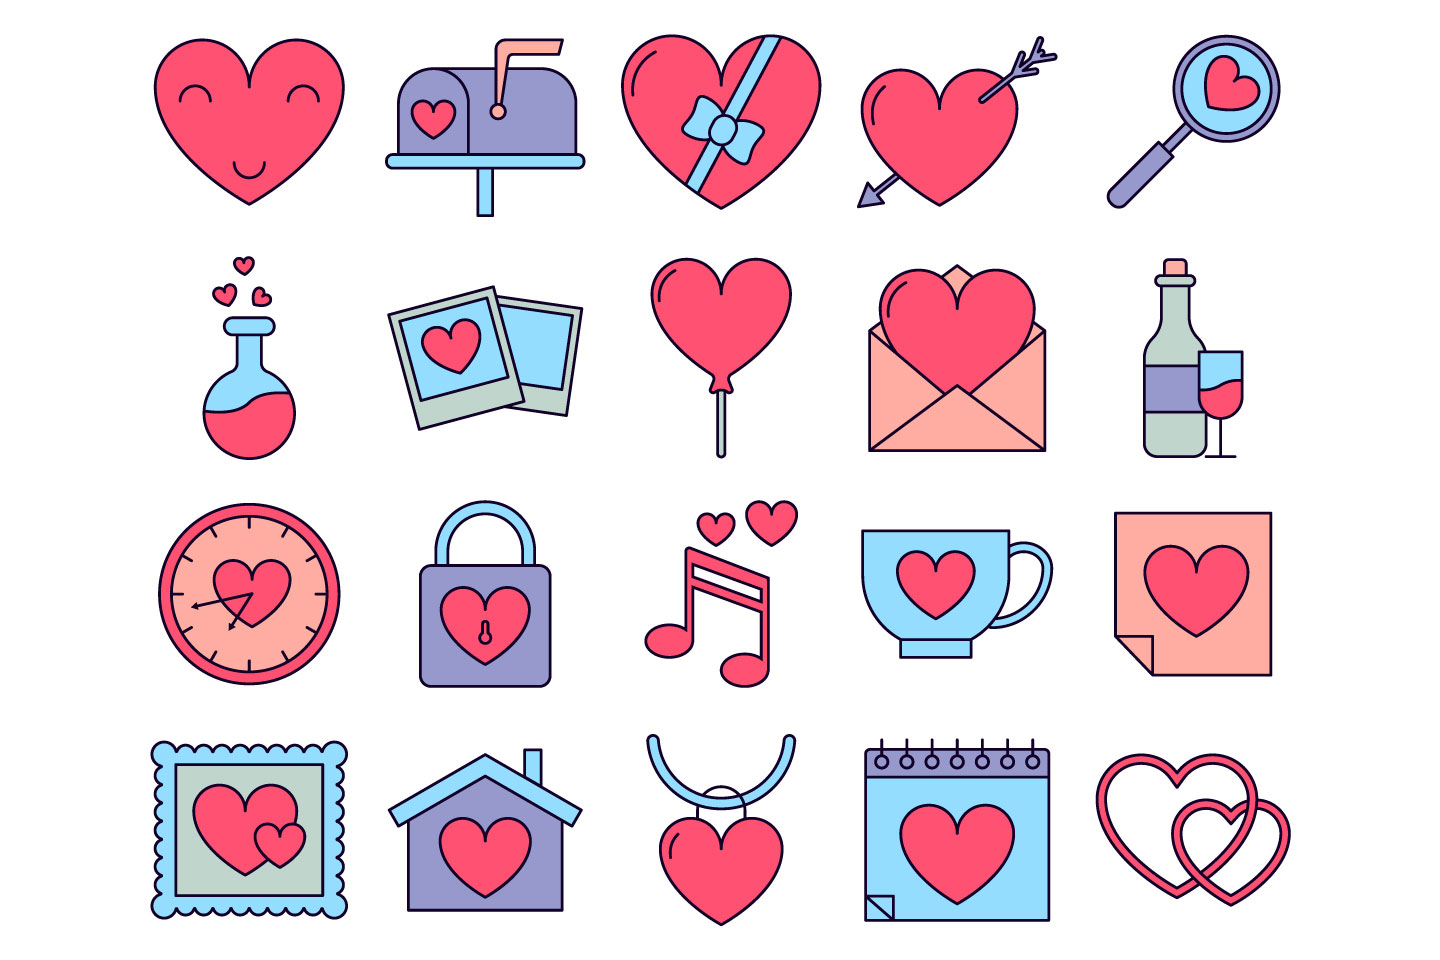 Valentines Day Vector Art, Icons, and Graphics for Free Download,  valentines day 